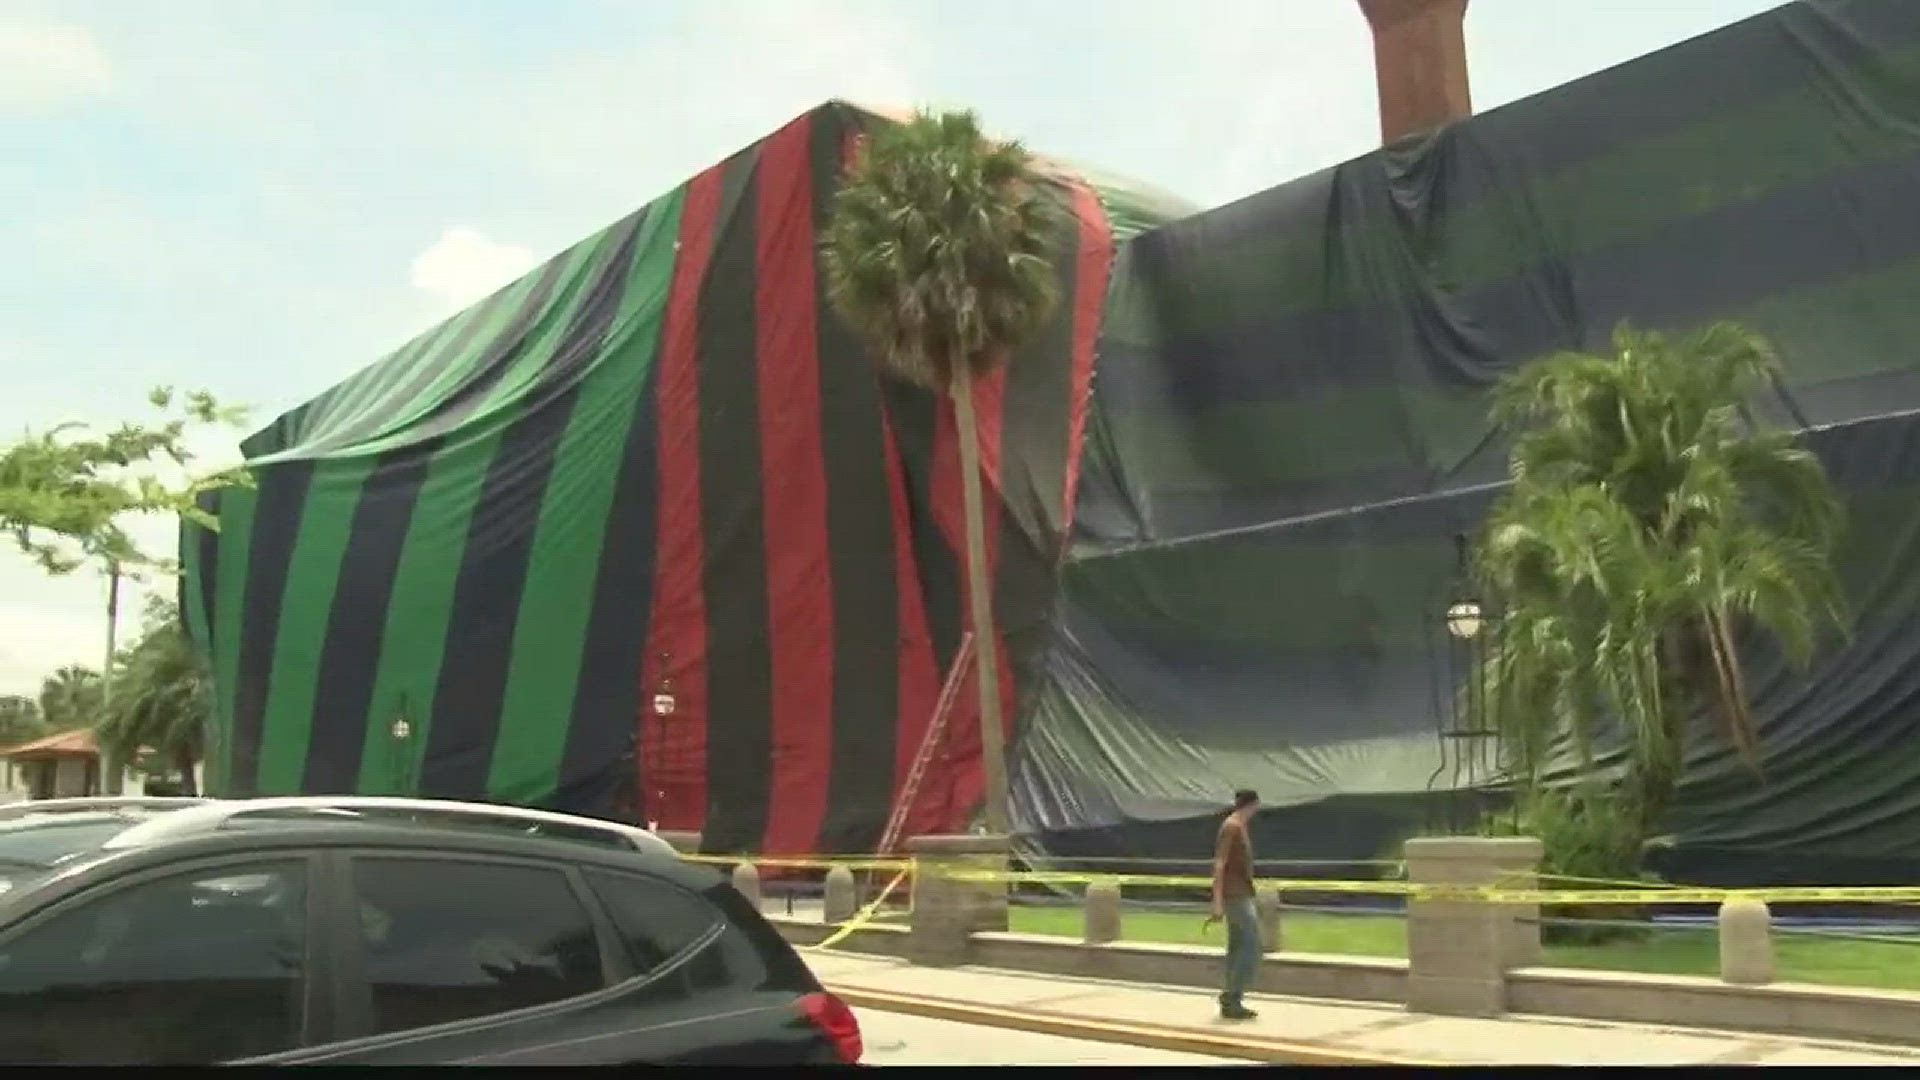 Businesses and city offices had to evacuate for five days due to a termite infestation